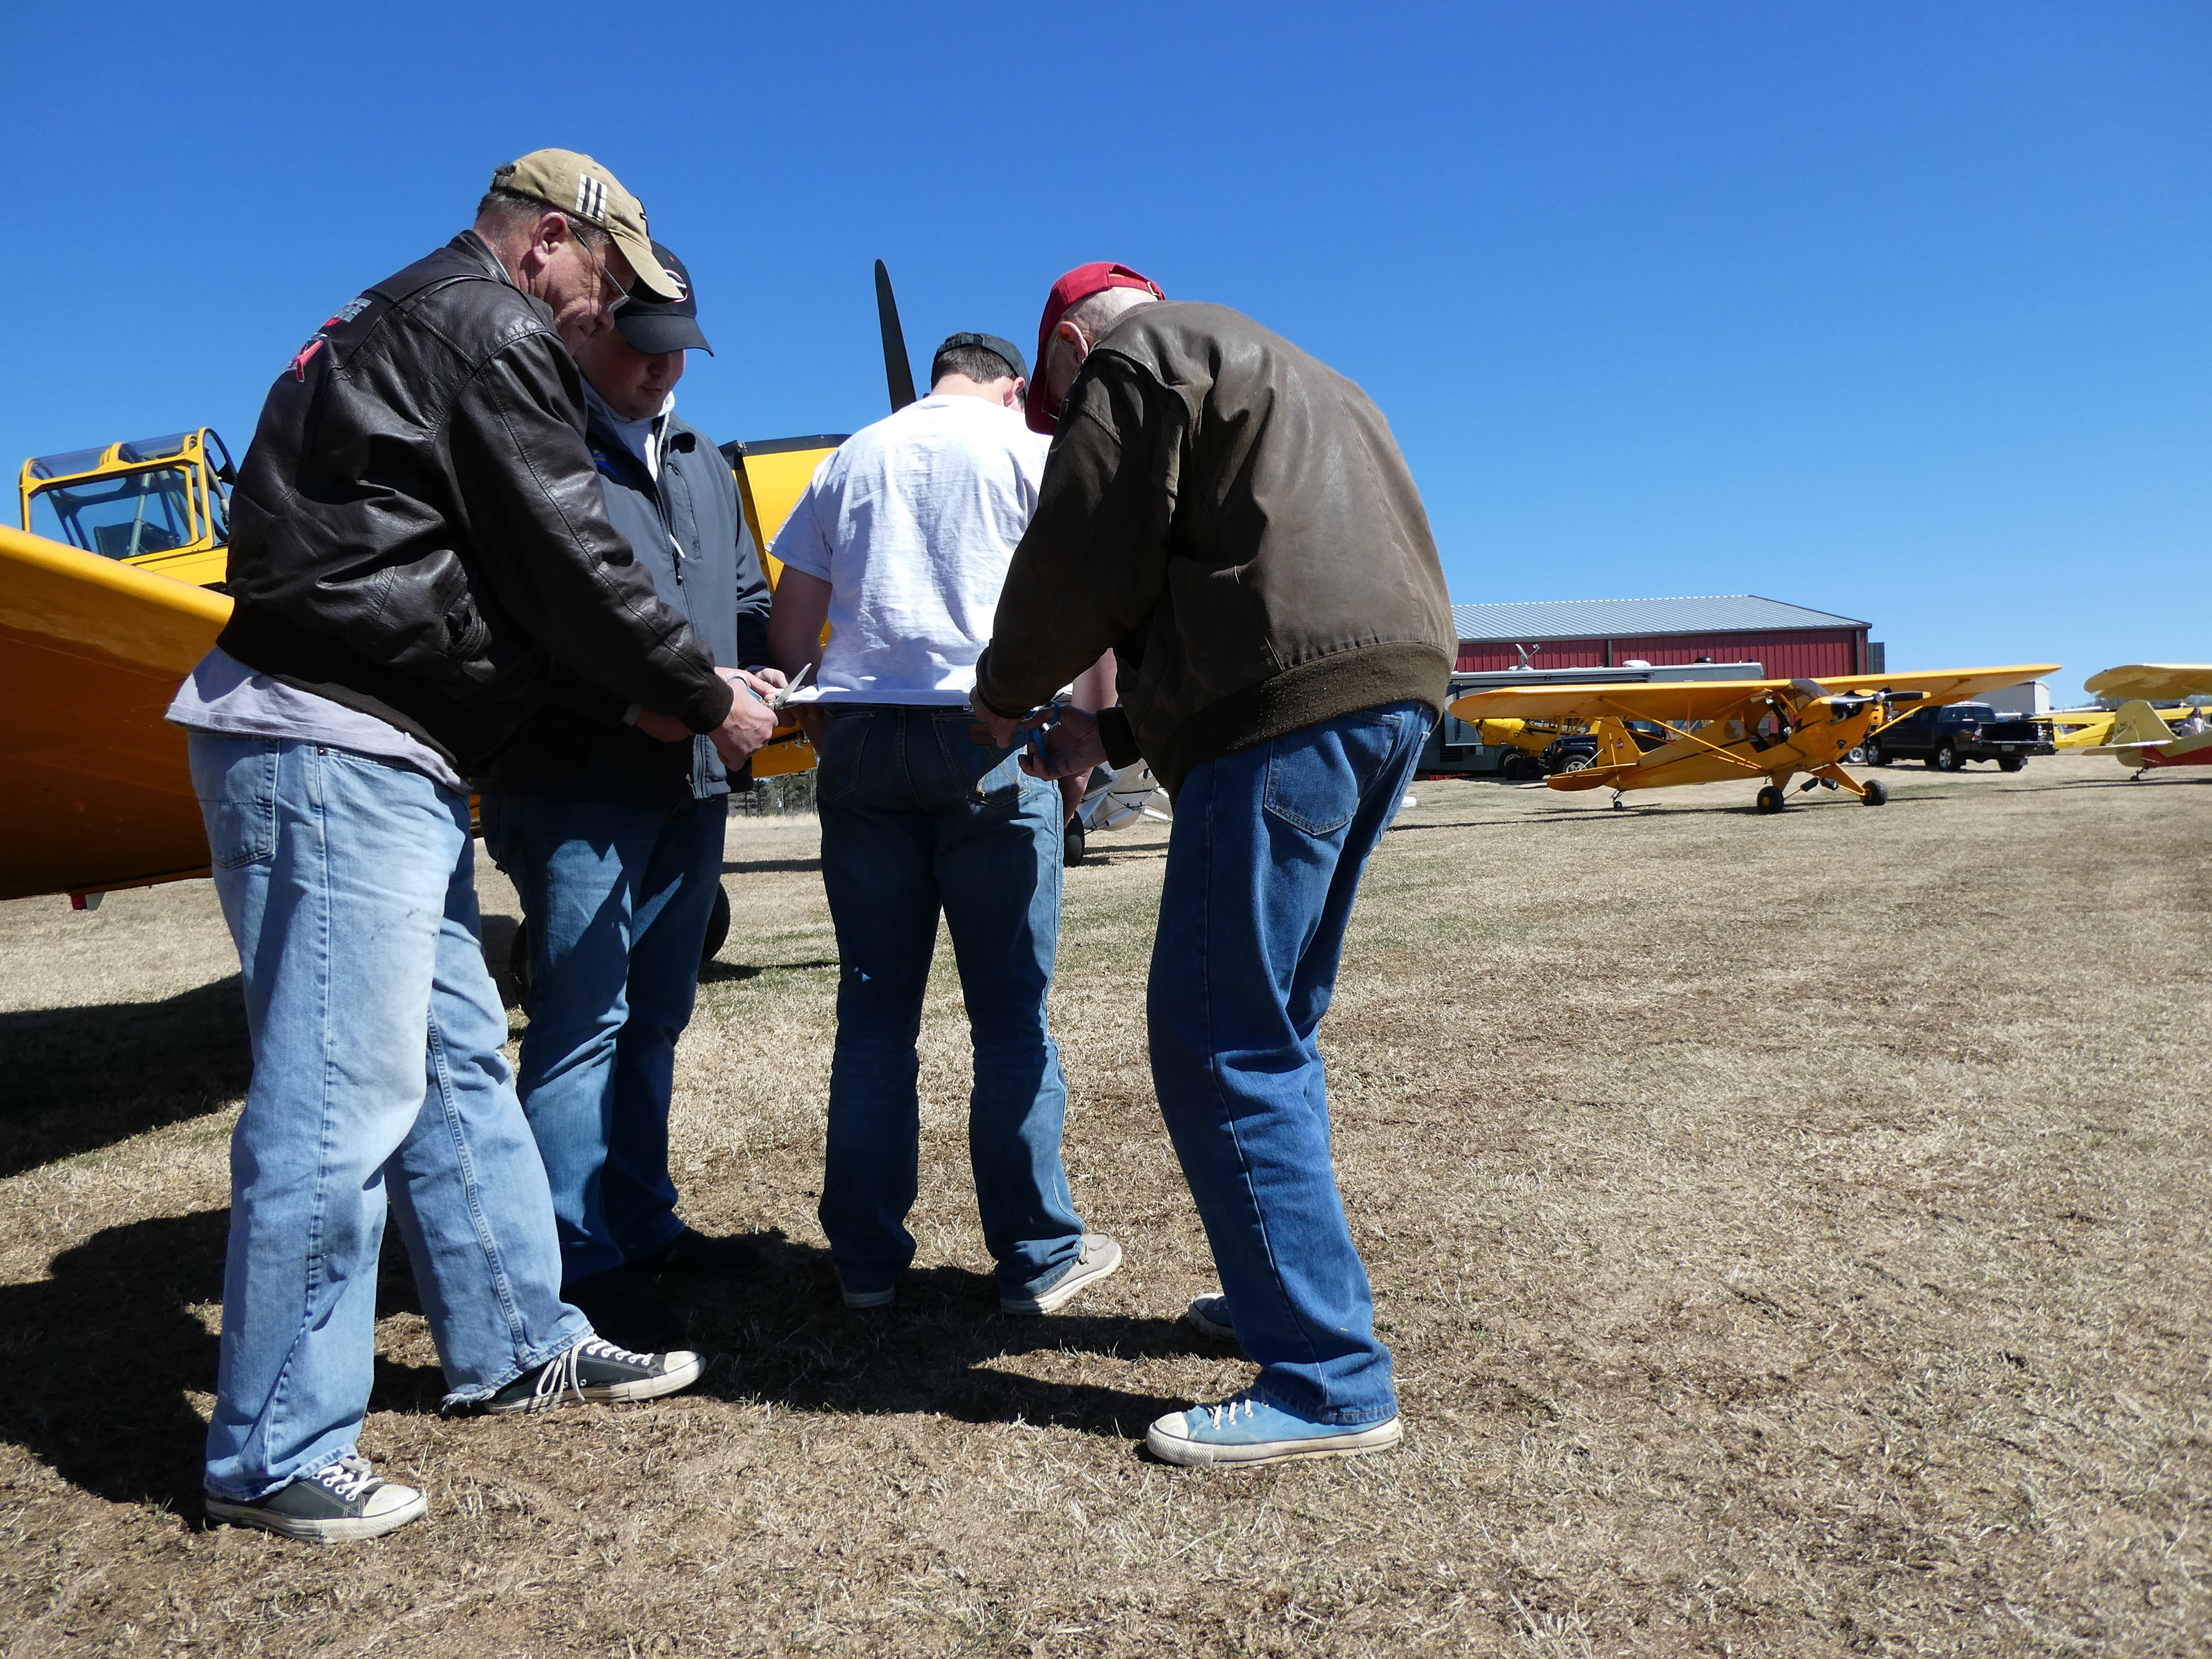 Alan Miller, Jacob Gates, and Harry Ballance cut James Frank’s shirttail after he soloed four airplanes on his sixteenth birthday. Photo by Cayla McLeod.  